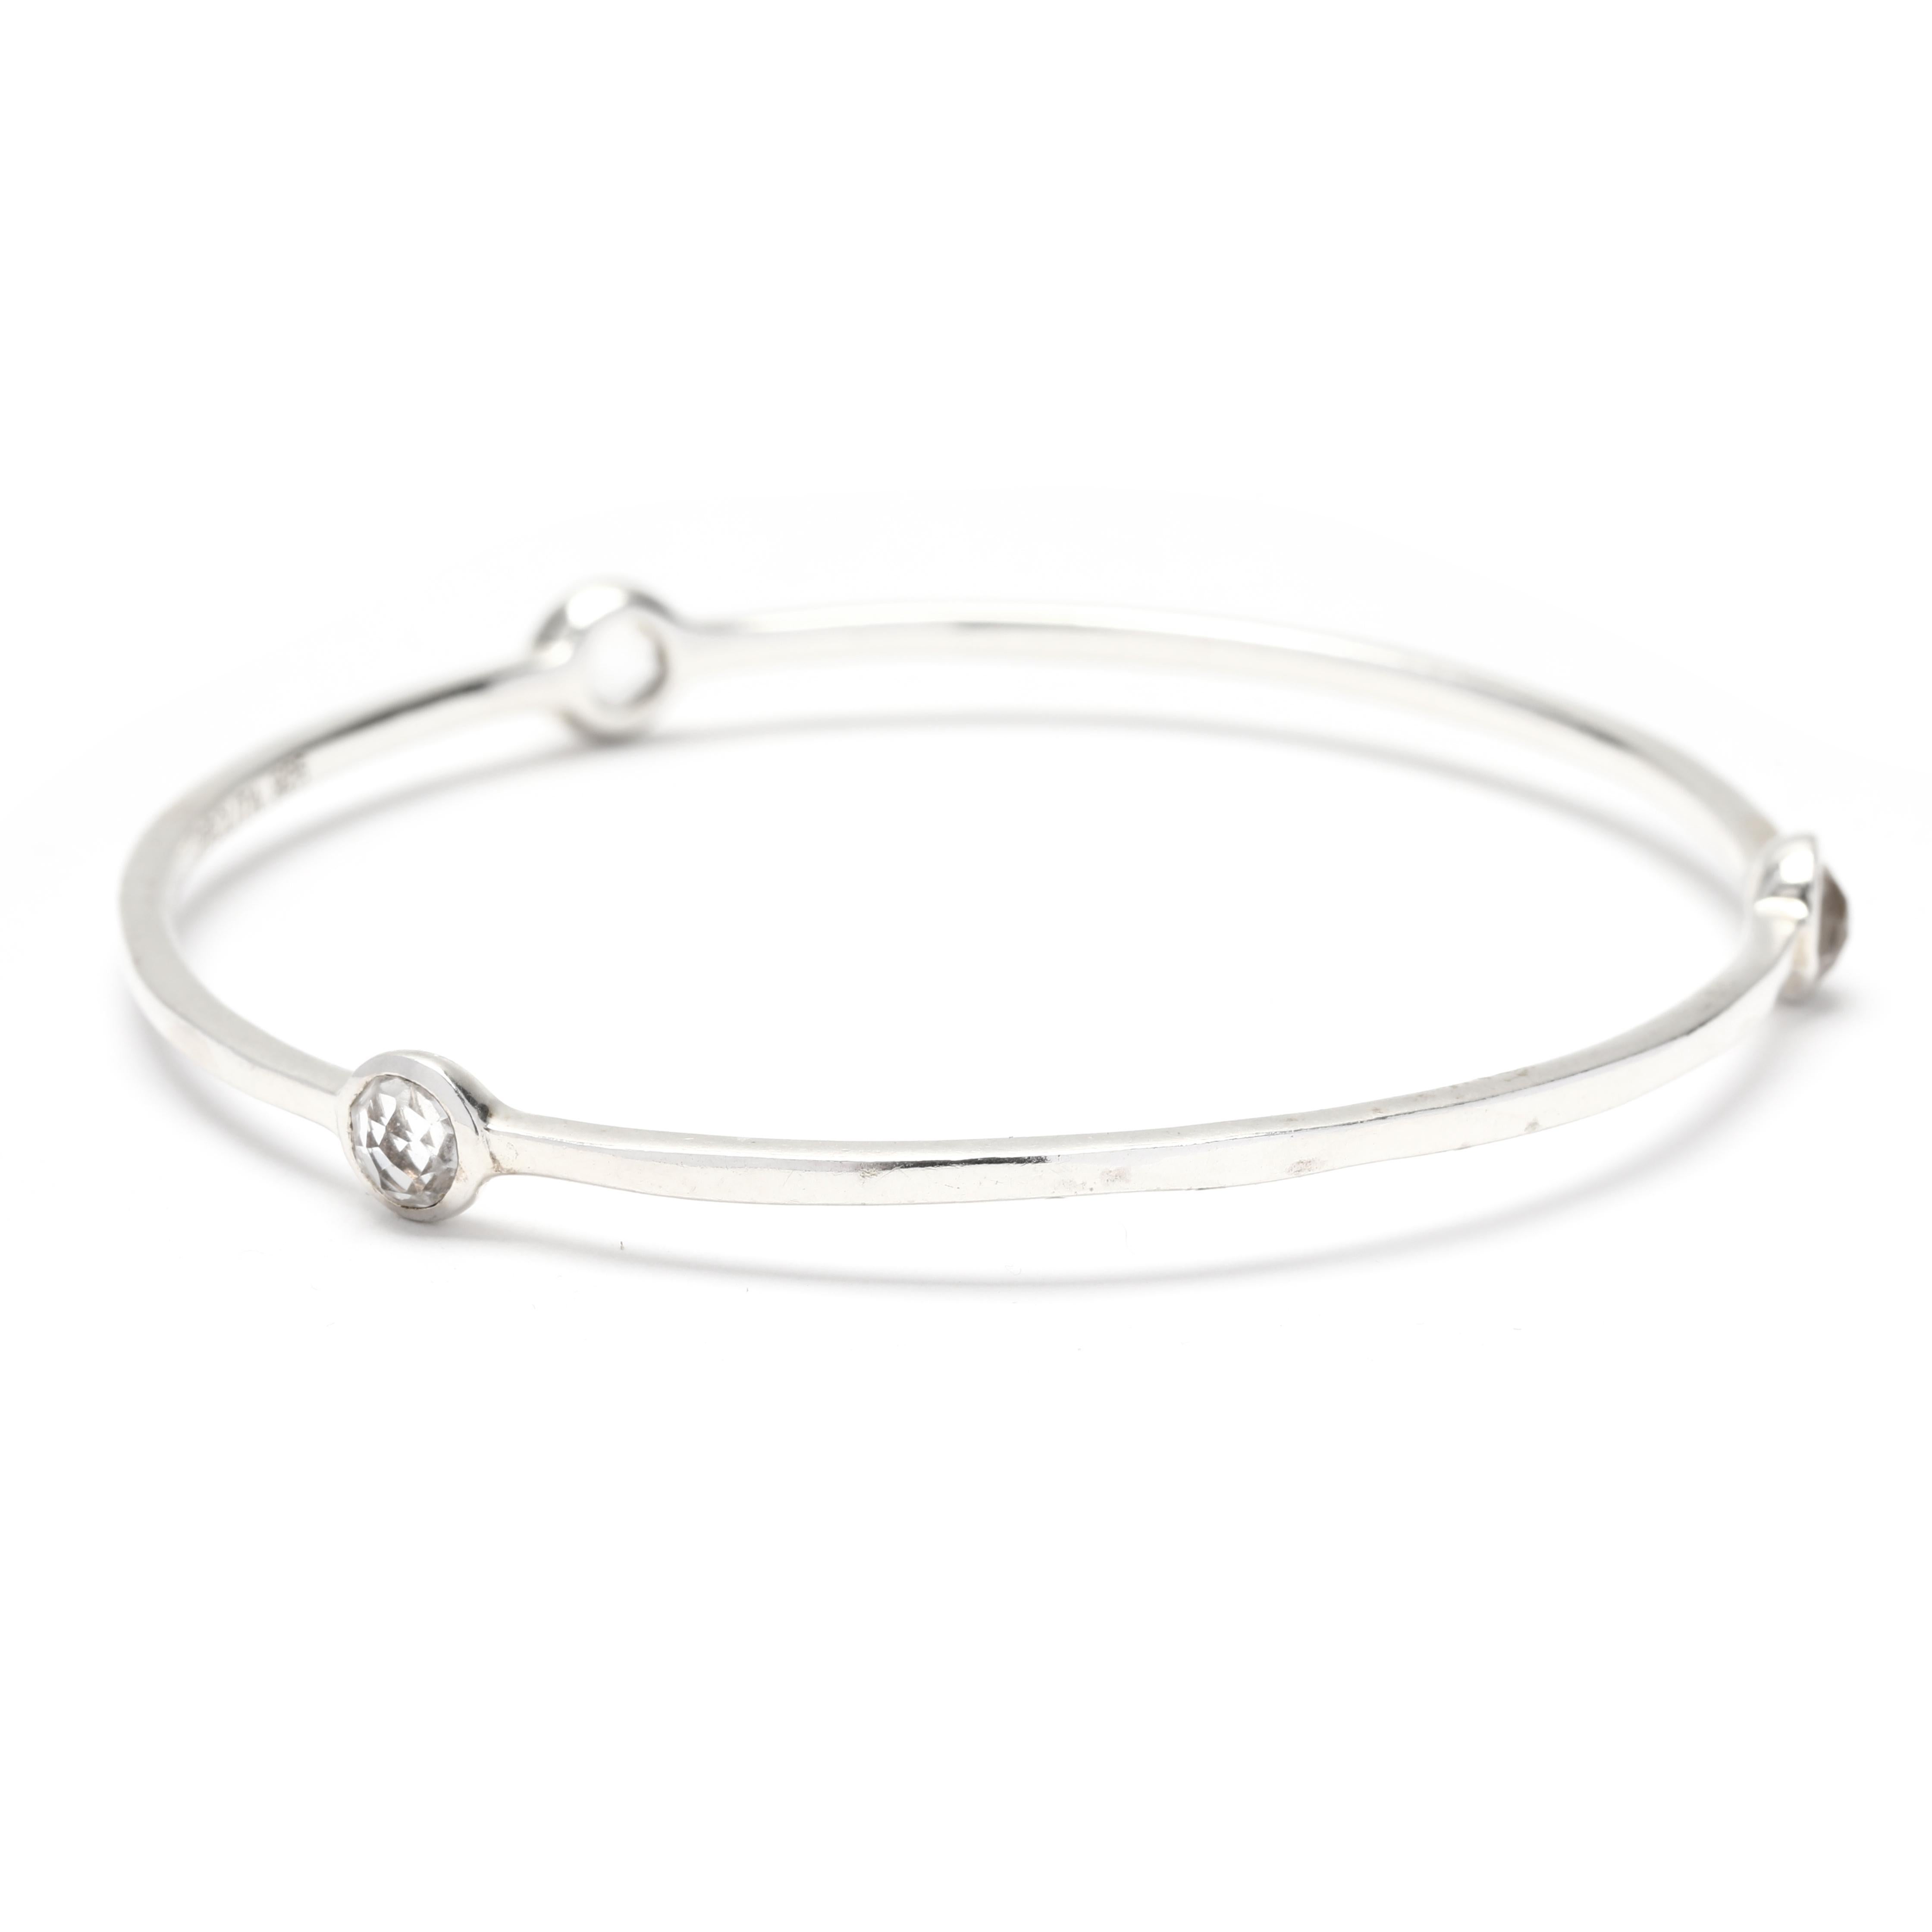 This elegant Ippolita Rock Candy 3 Stone Clear Quartz Bangle Bracelet is a stunning addition to any jewelry collection. Made from sterling silver, this simple bangle bracelet features three clear quartz stones set in a row.

Stones:
- clear quartz,